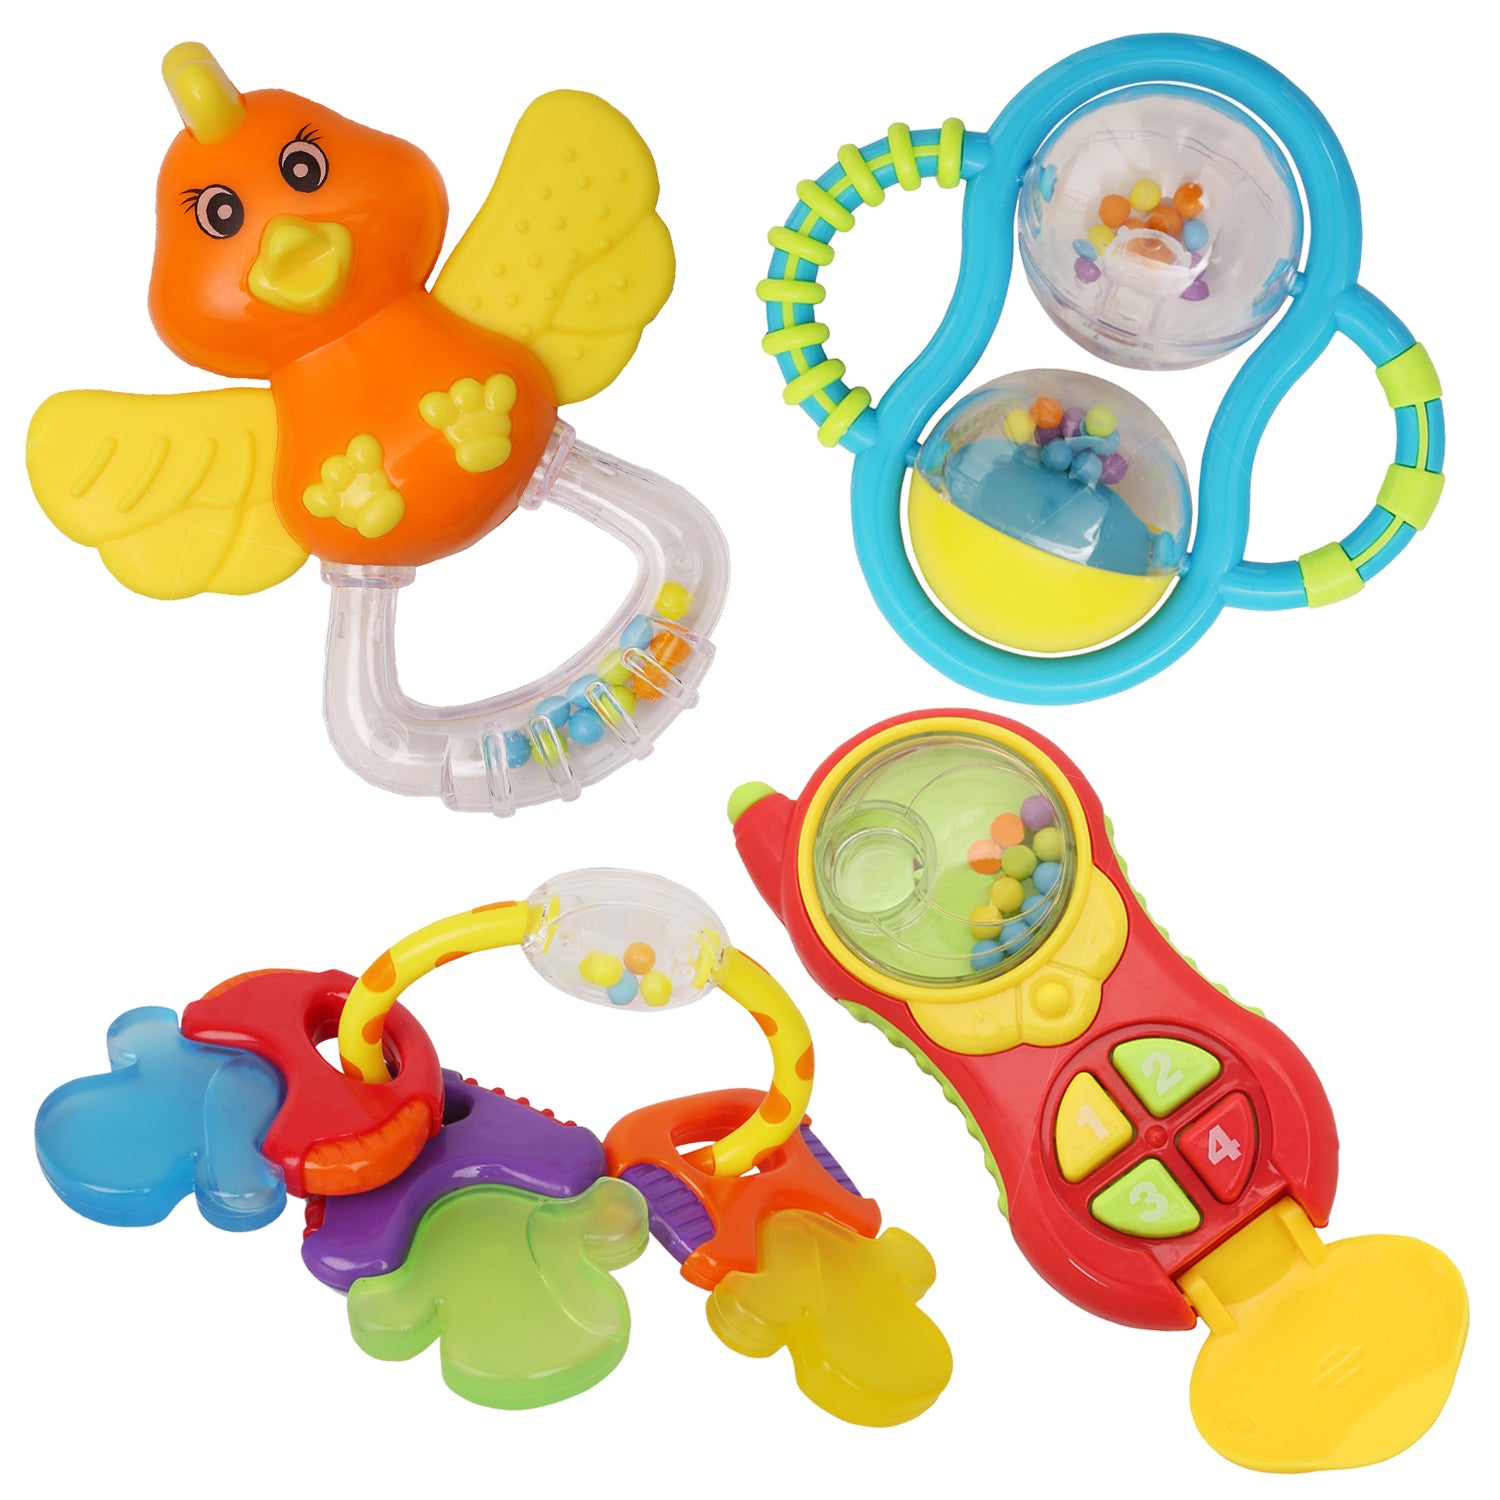 Mixed Multicolour Set of 4 Musical Rattle Toys With Light - Baby Moo